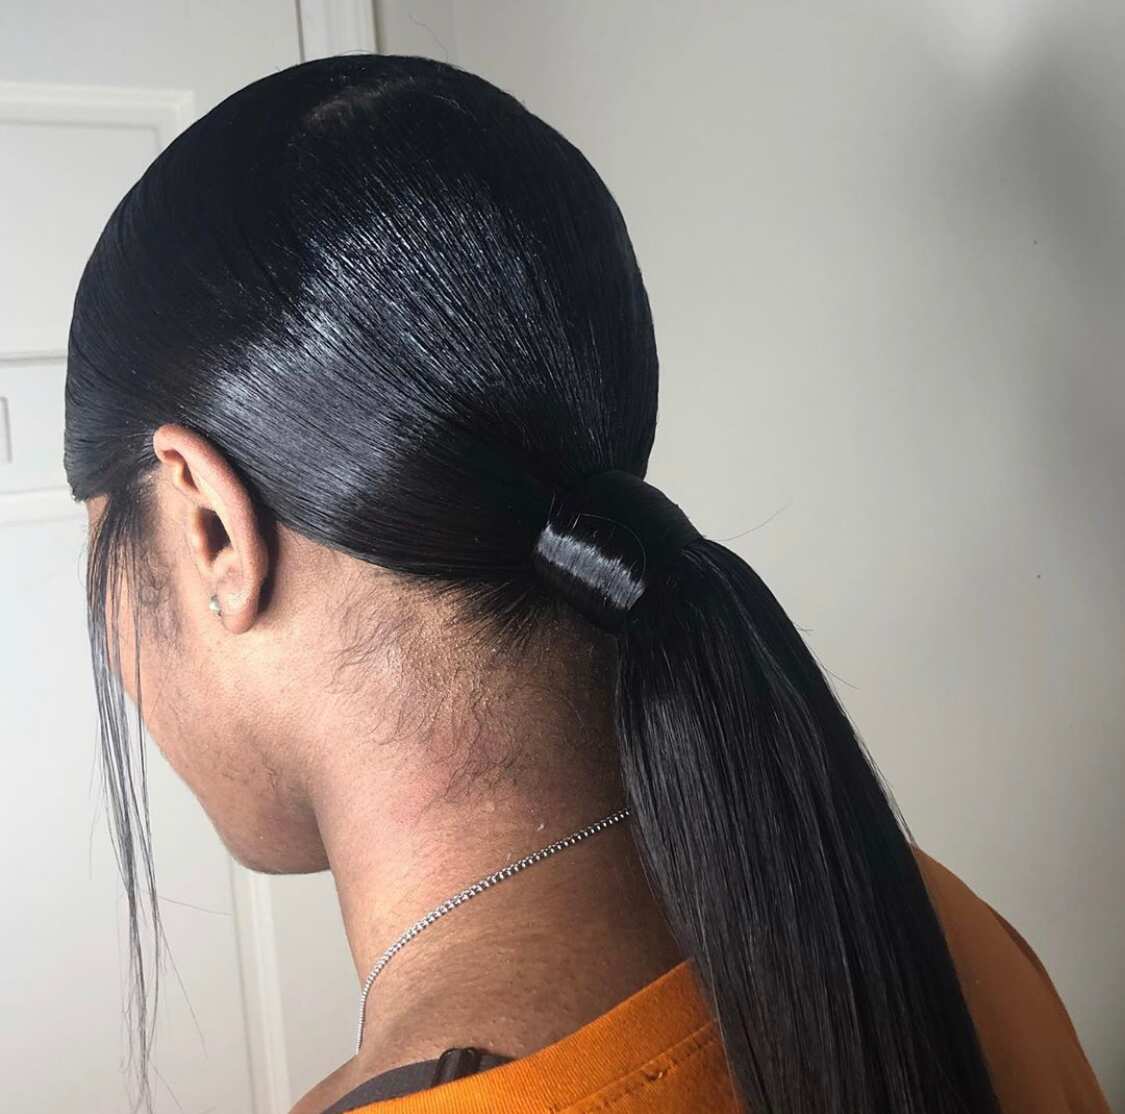 120g Long Hairstyle Straight Ponytail Virgin Hair Extensions For Black Women  Natural Hair Brazilian Clip Hair Drawstring Ponytails HairPiece From  Divaswigszhou, $39.92 | DHgate.Com